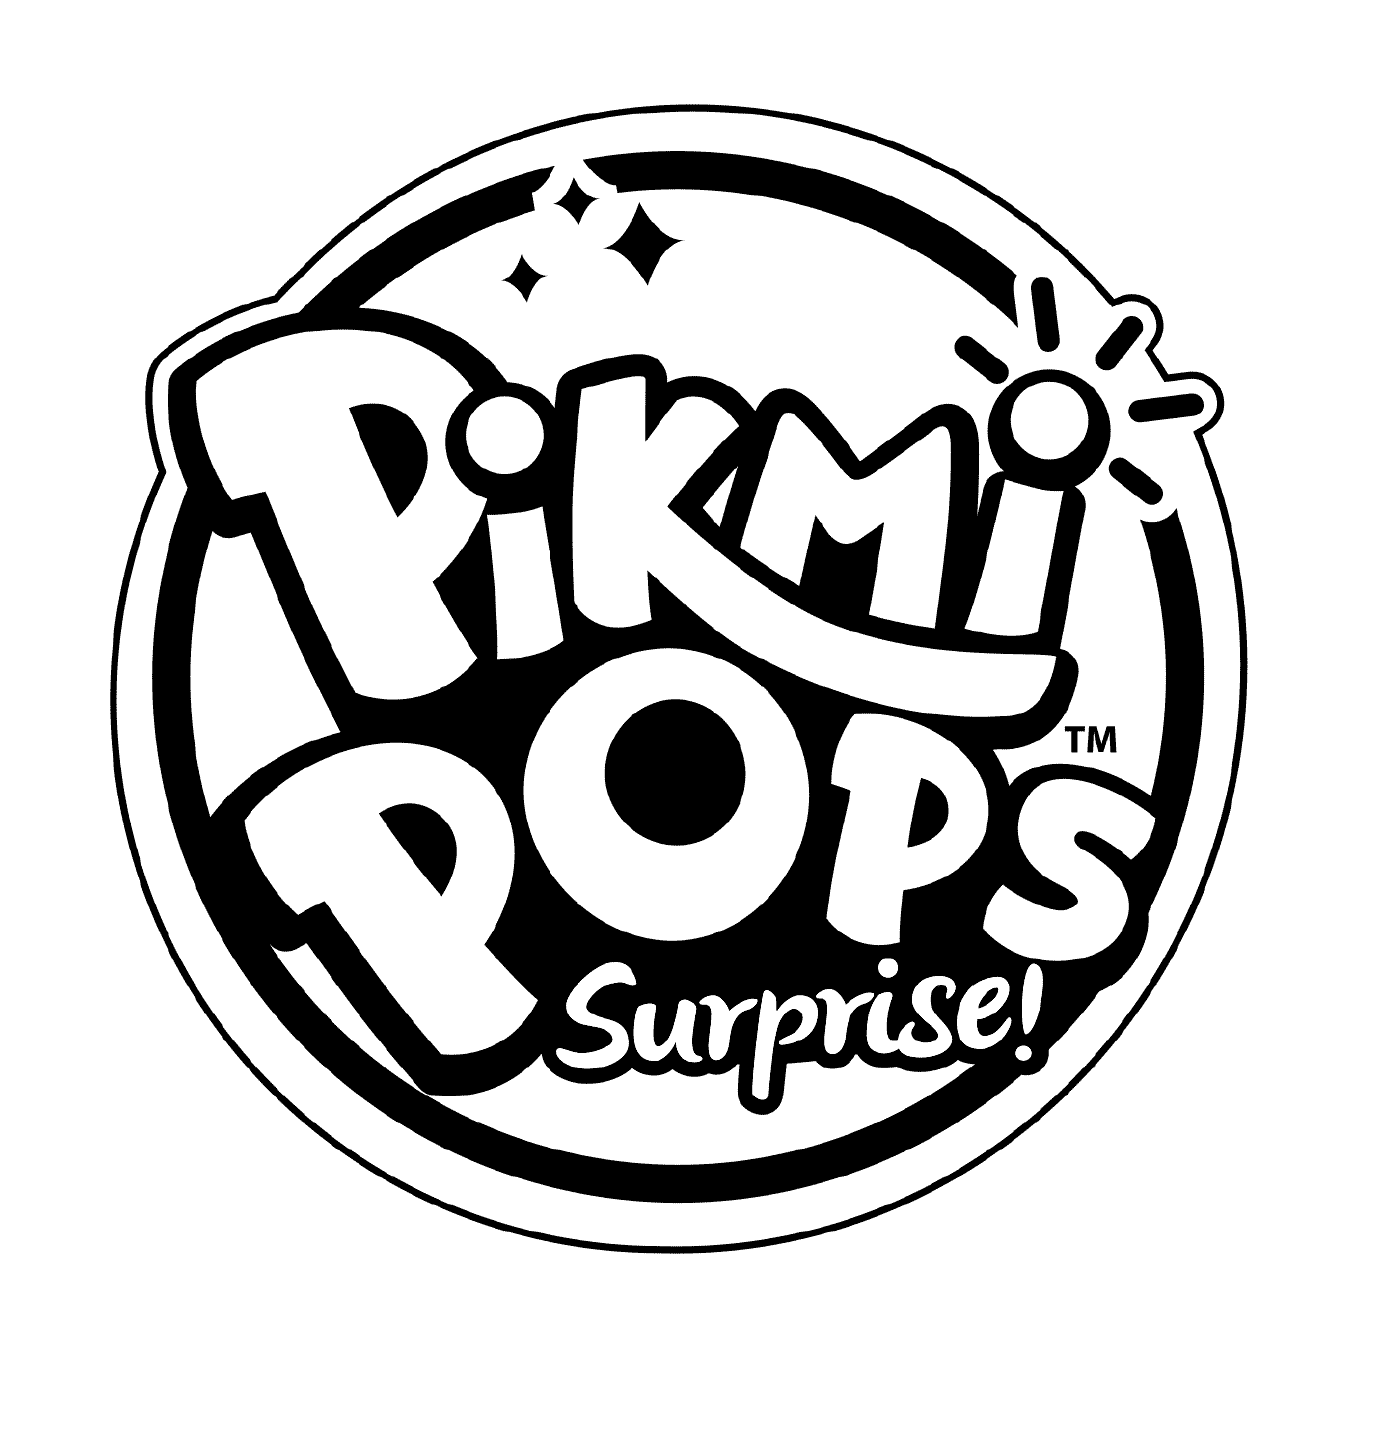  Coloring of the Pikmi Pops logo 